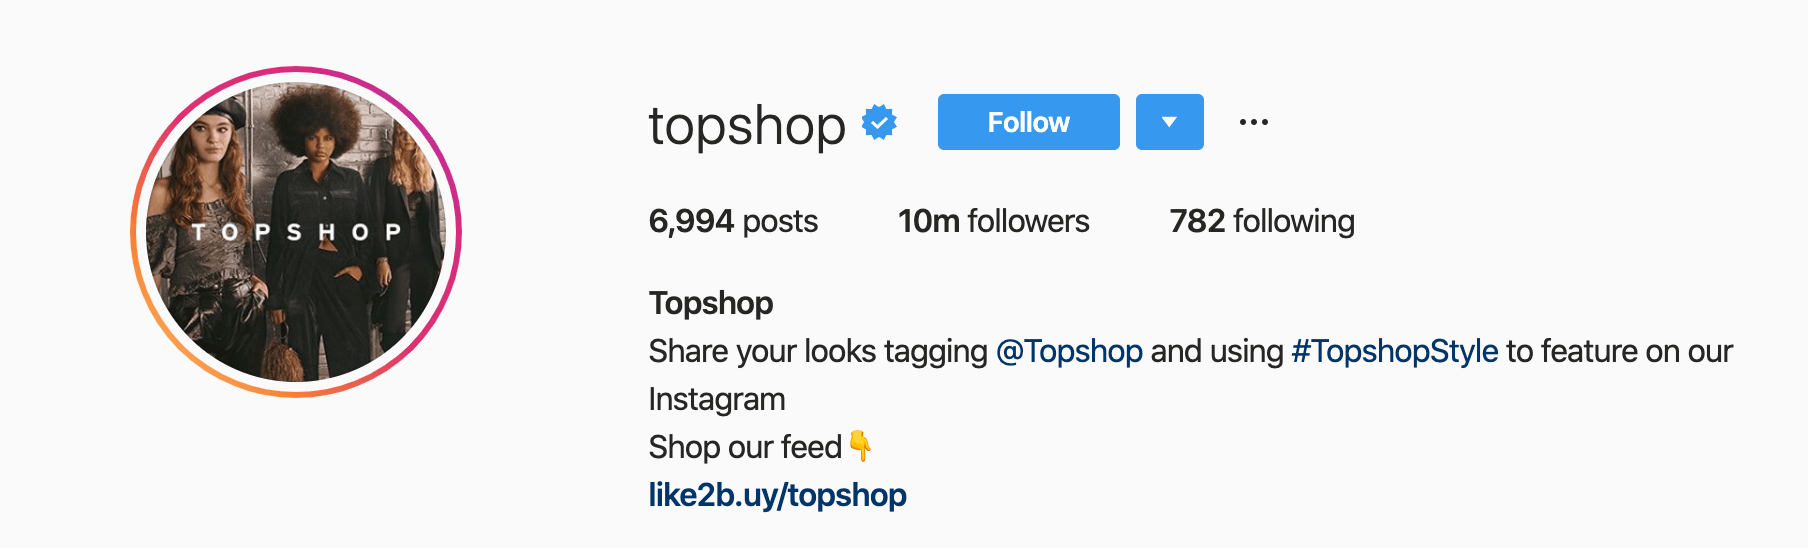 TopShop and their dedicated hashtag